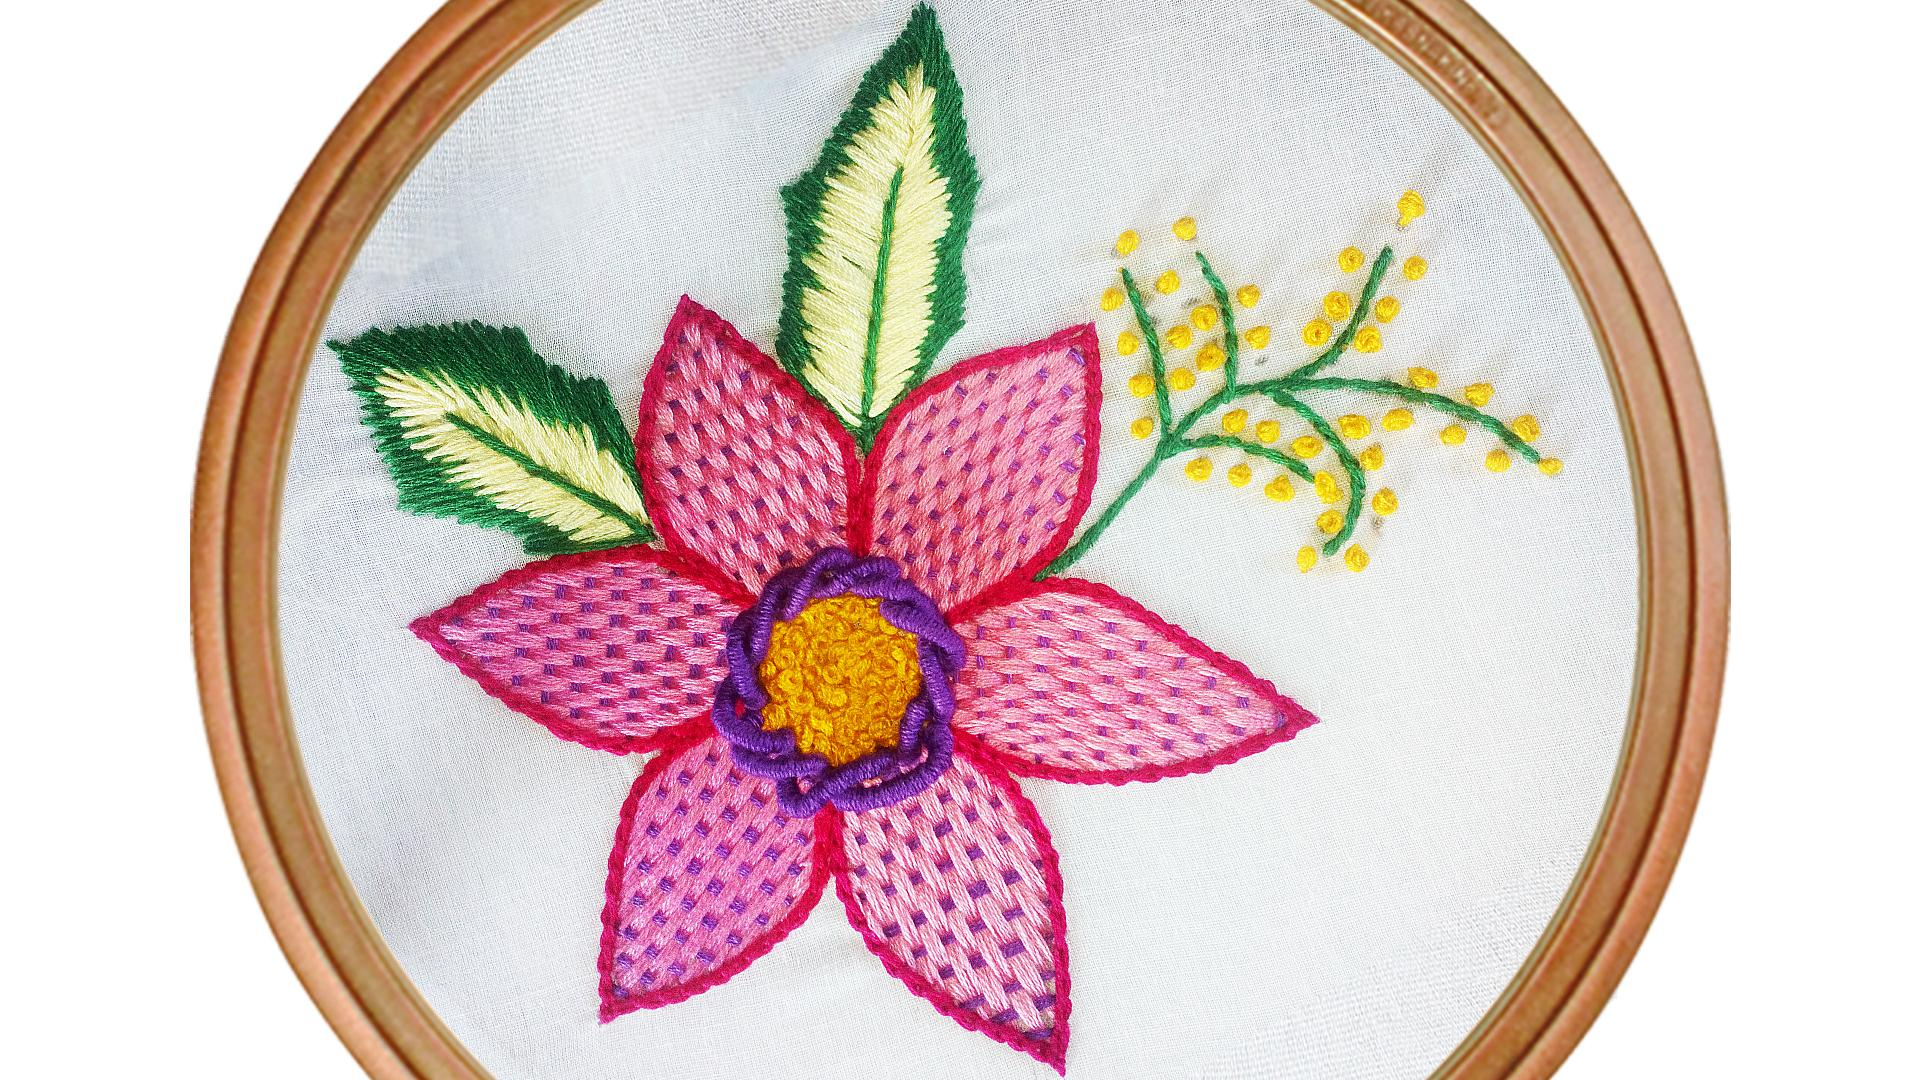 French Knots Embroidery Patterns Fantasy Flower Embroidery With Checkered Stitch French Knot